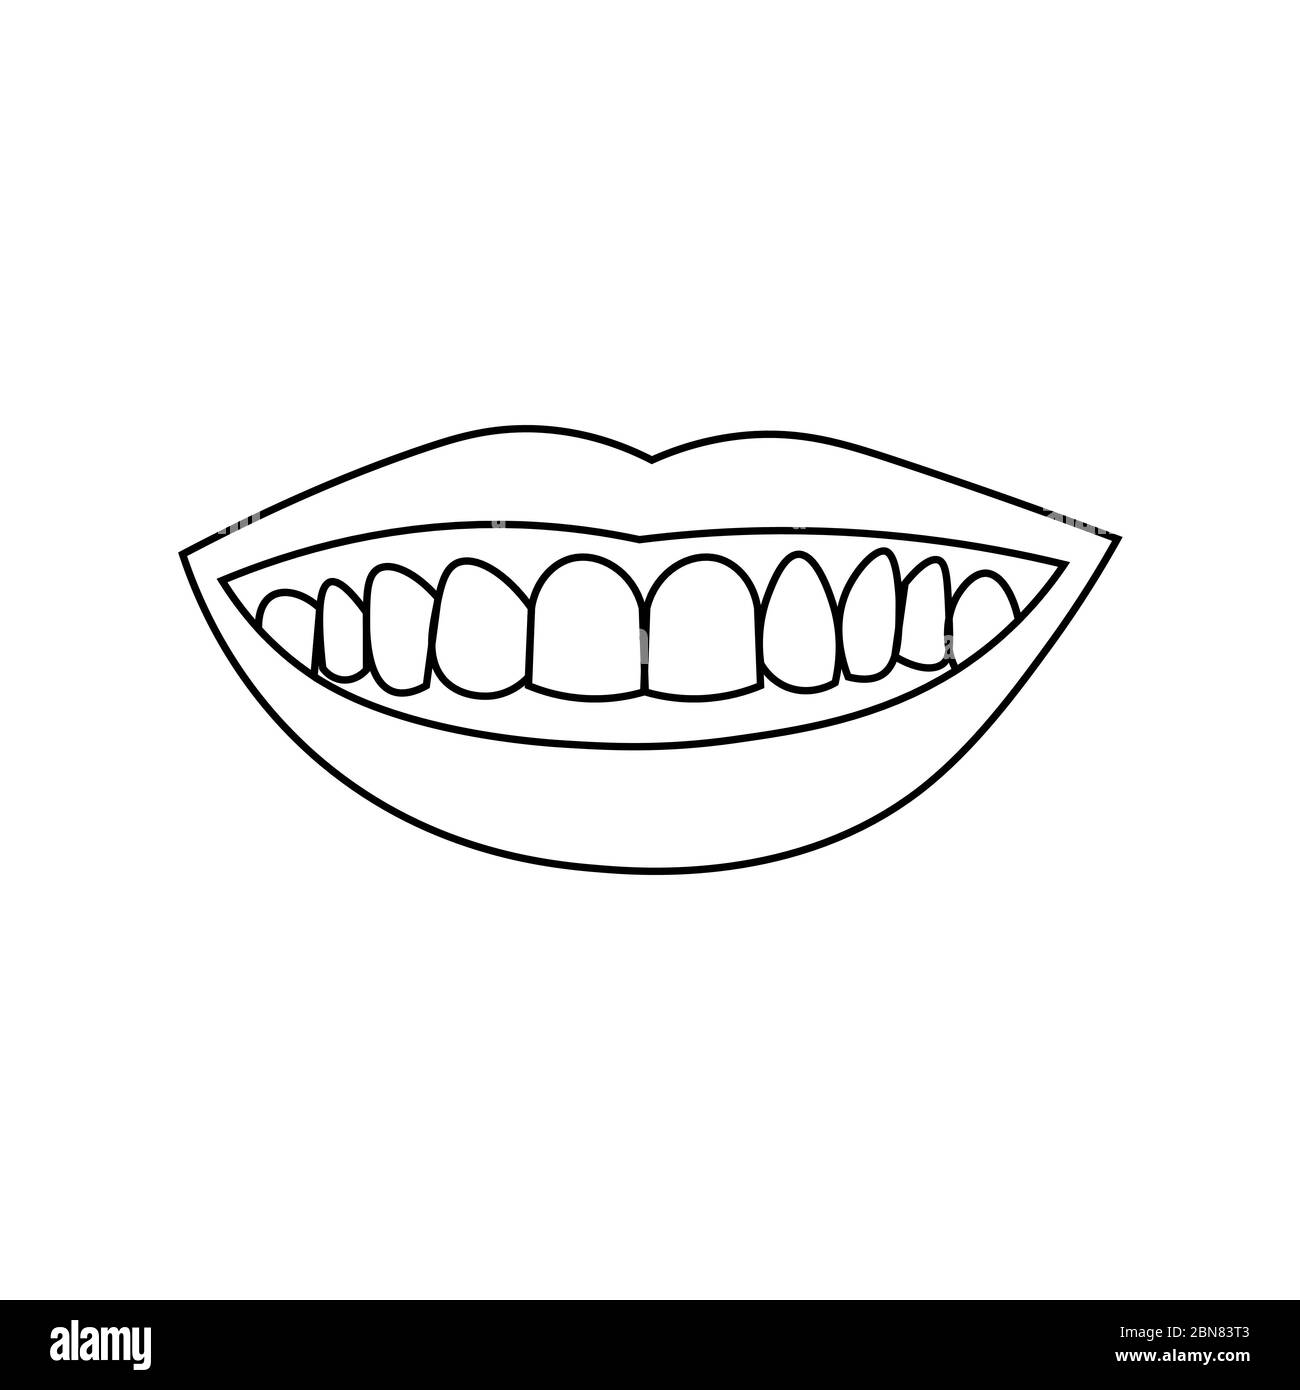 Sketch of the tooth Royalty Free Vector Image  VectorStock